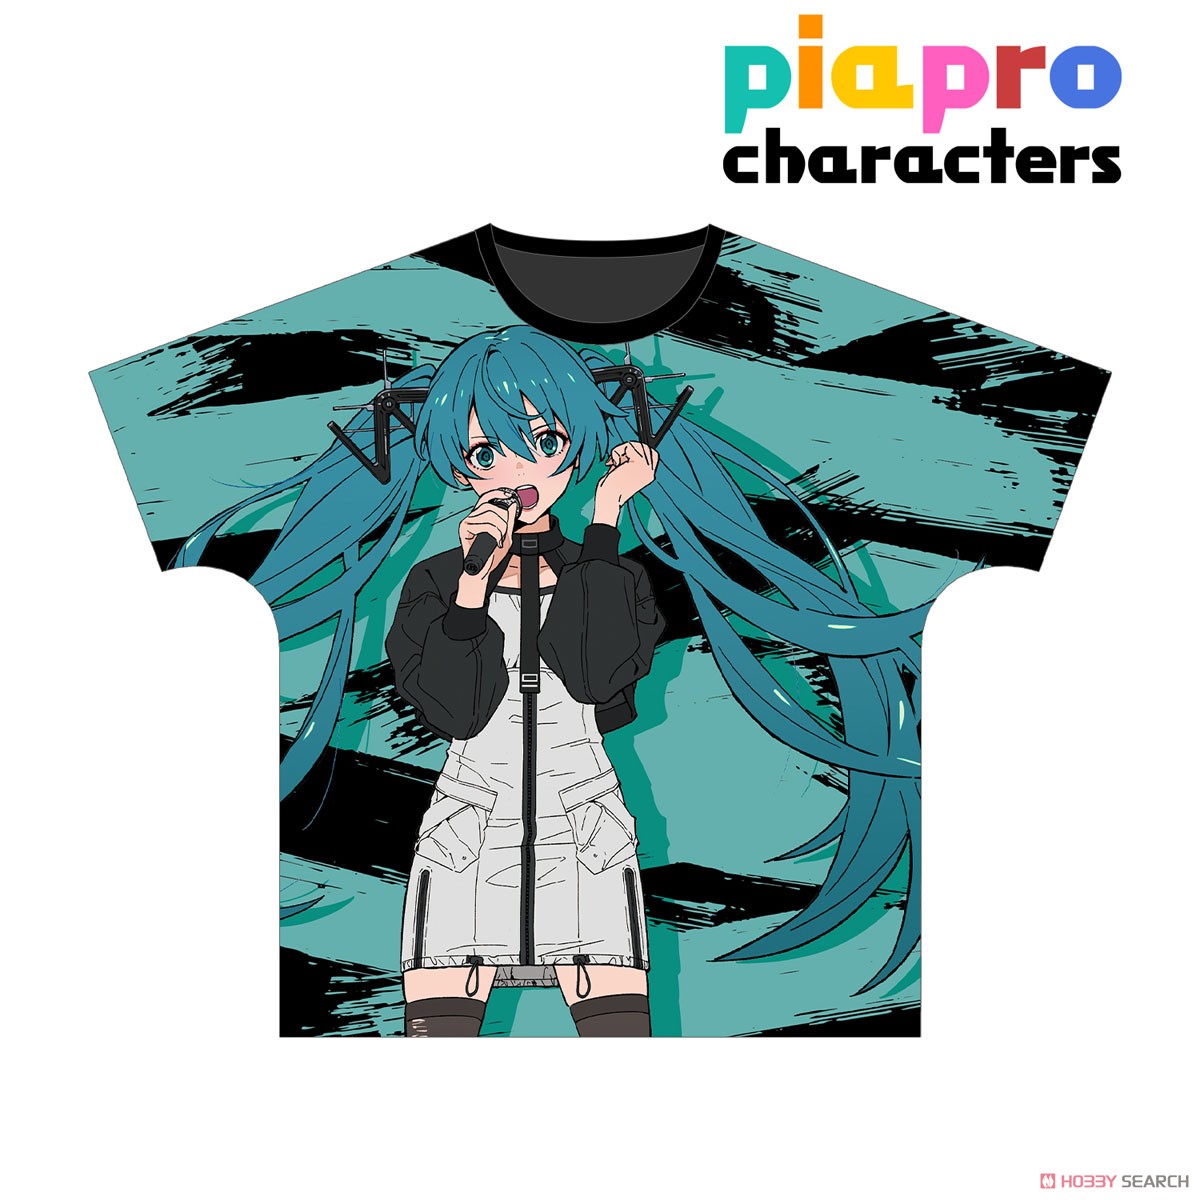 Piapro Characters [Especially Illustrated] Hatsune Miku Band Ver. Art by Tarou 2 Full Graphic T-Shirt Unisex M (Anime Toy) Item picture1